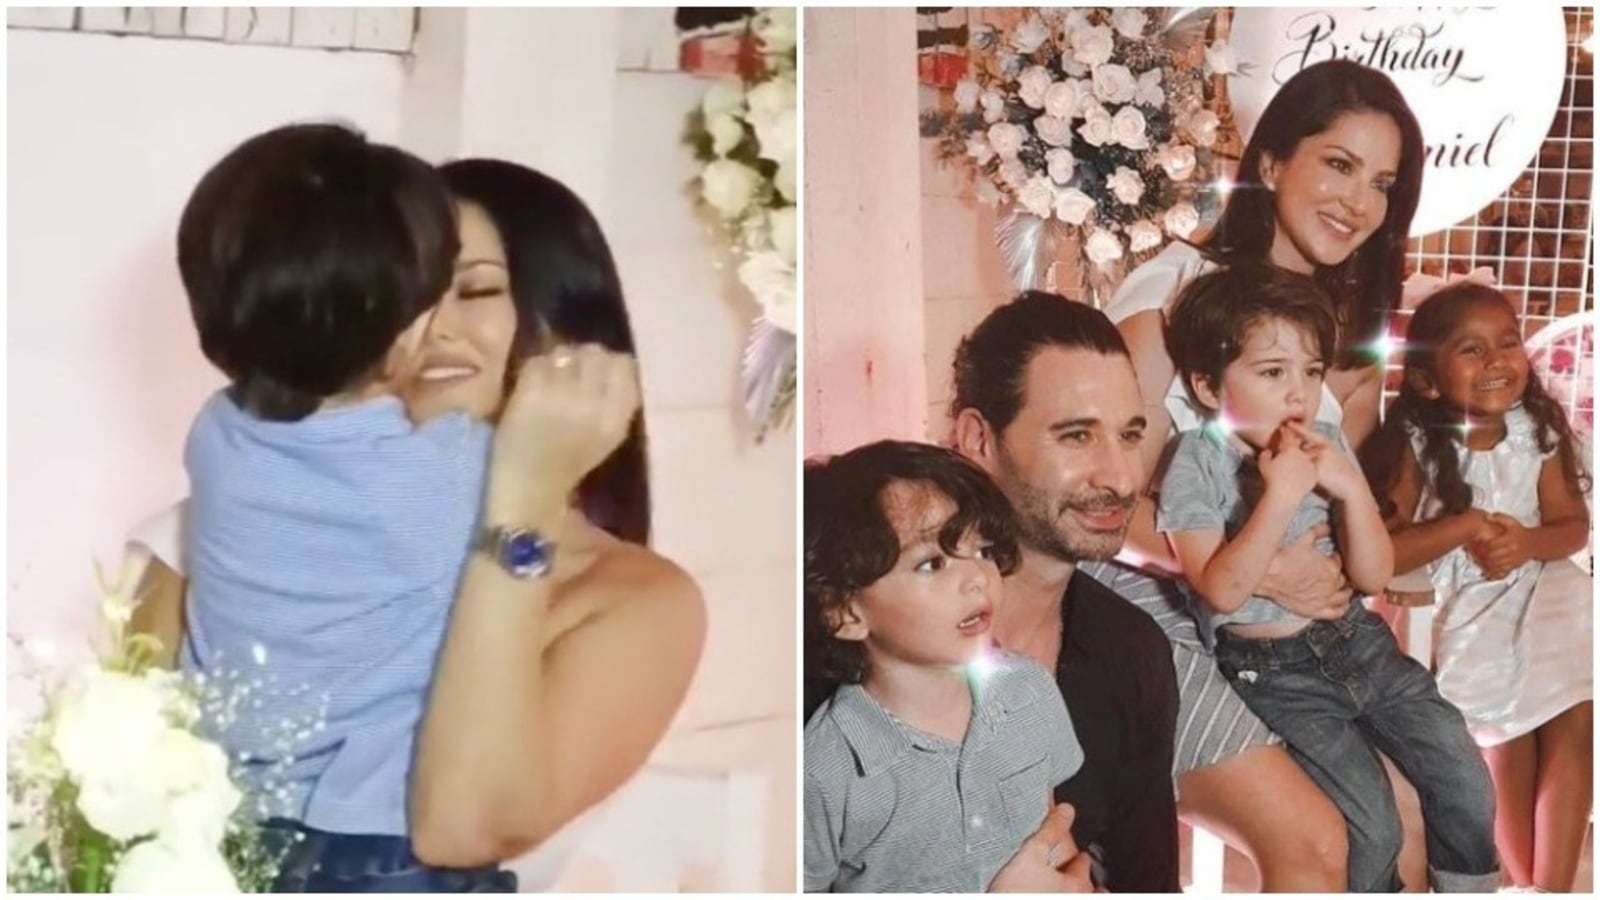 Sunny Leone cuddles son, gets kisses at husband Daniel Webbers birthday party pic pic